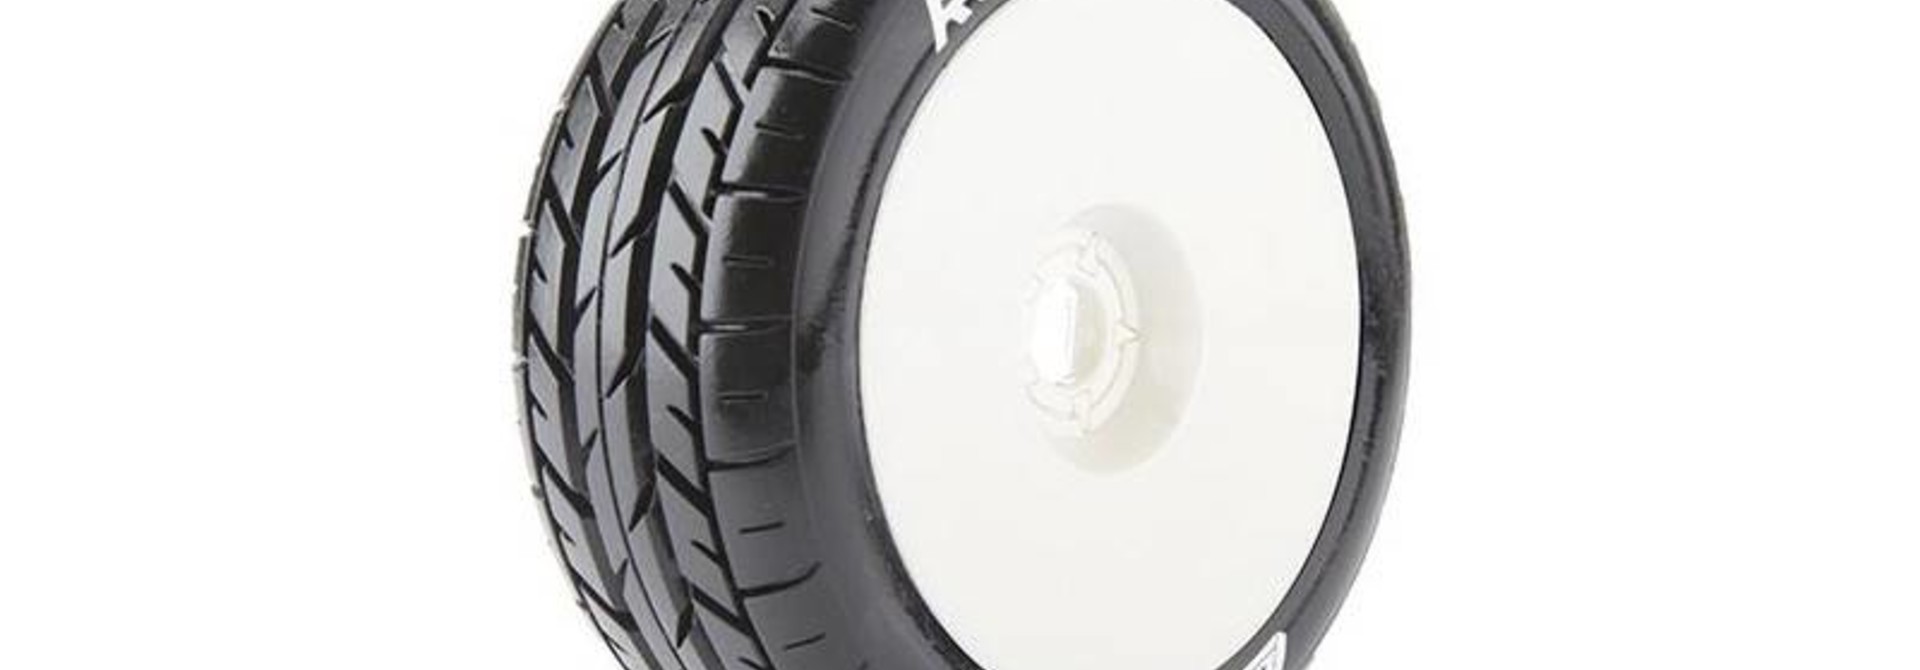 Louise RC - B-ROCKET - 1-8 Buggy Tire Set - Mounted - Soft - White Rims - Hex 17mm - L-T3190SW